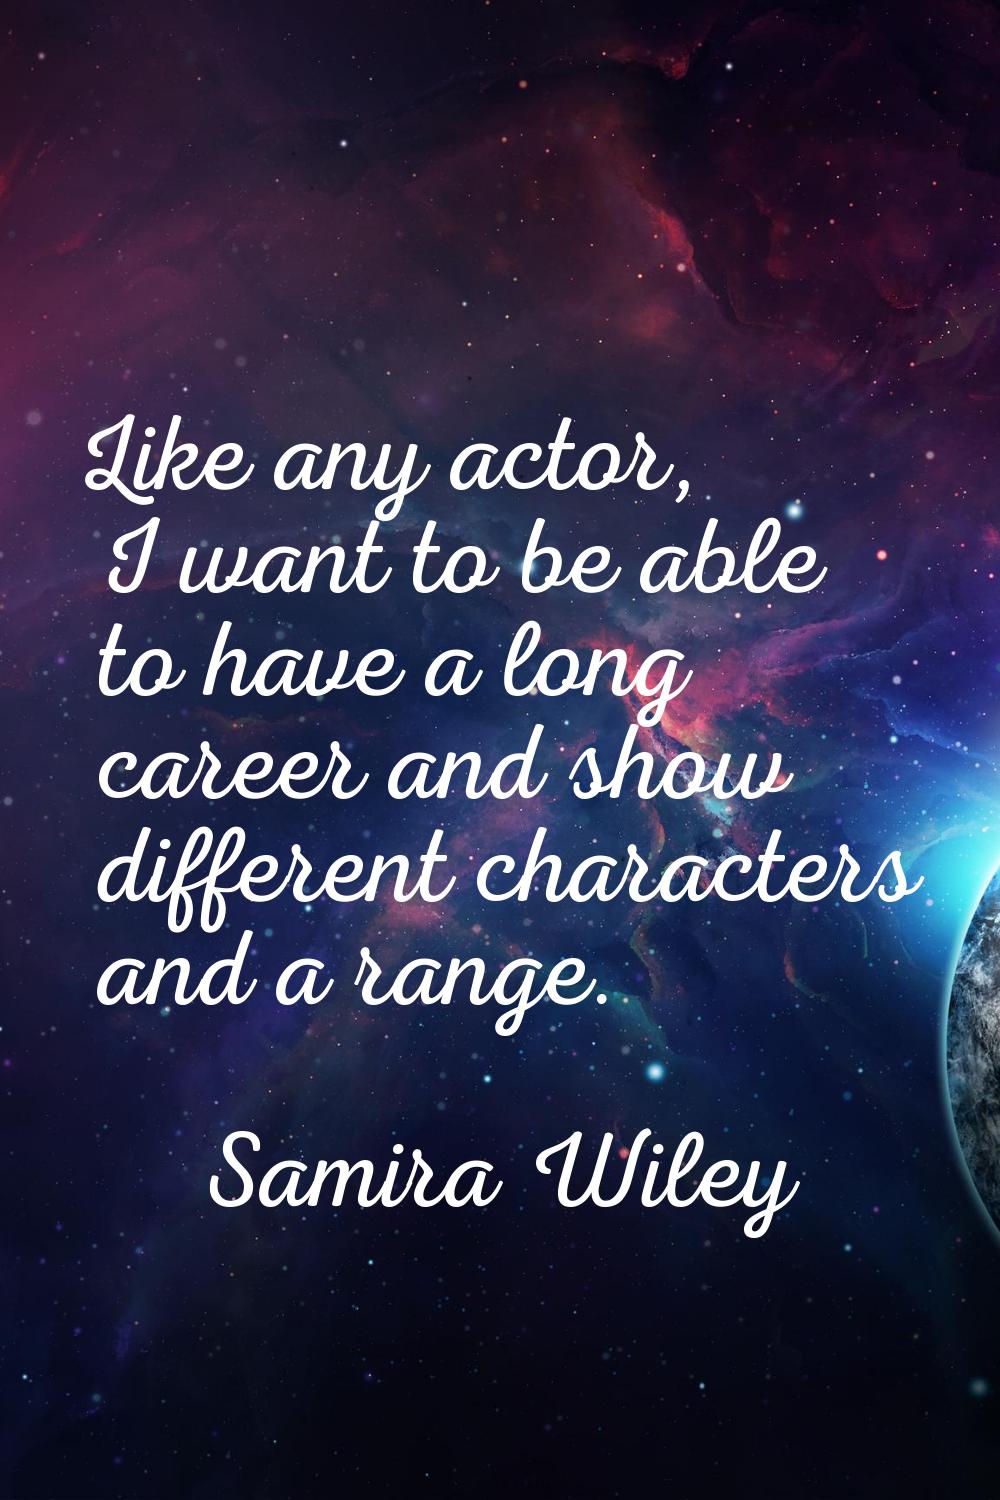 Like any actor, I want to be able to have a long career and show different characters and a range.